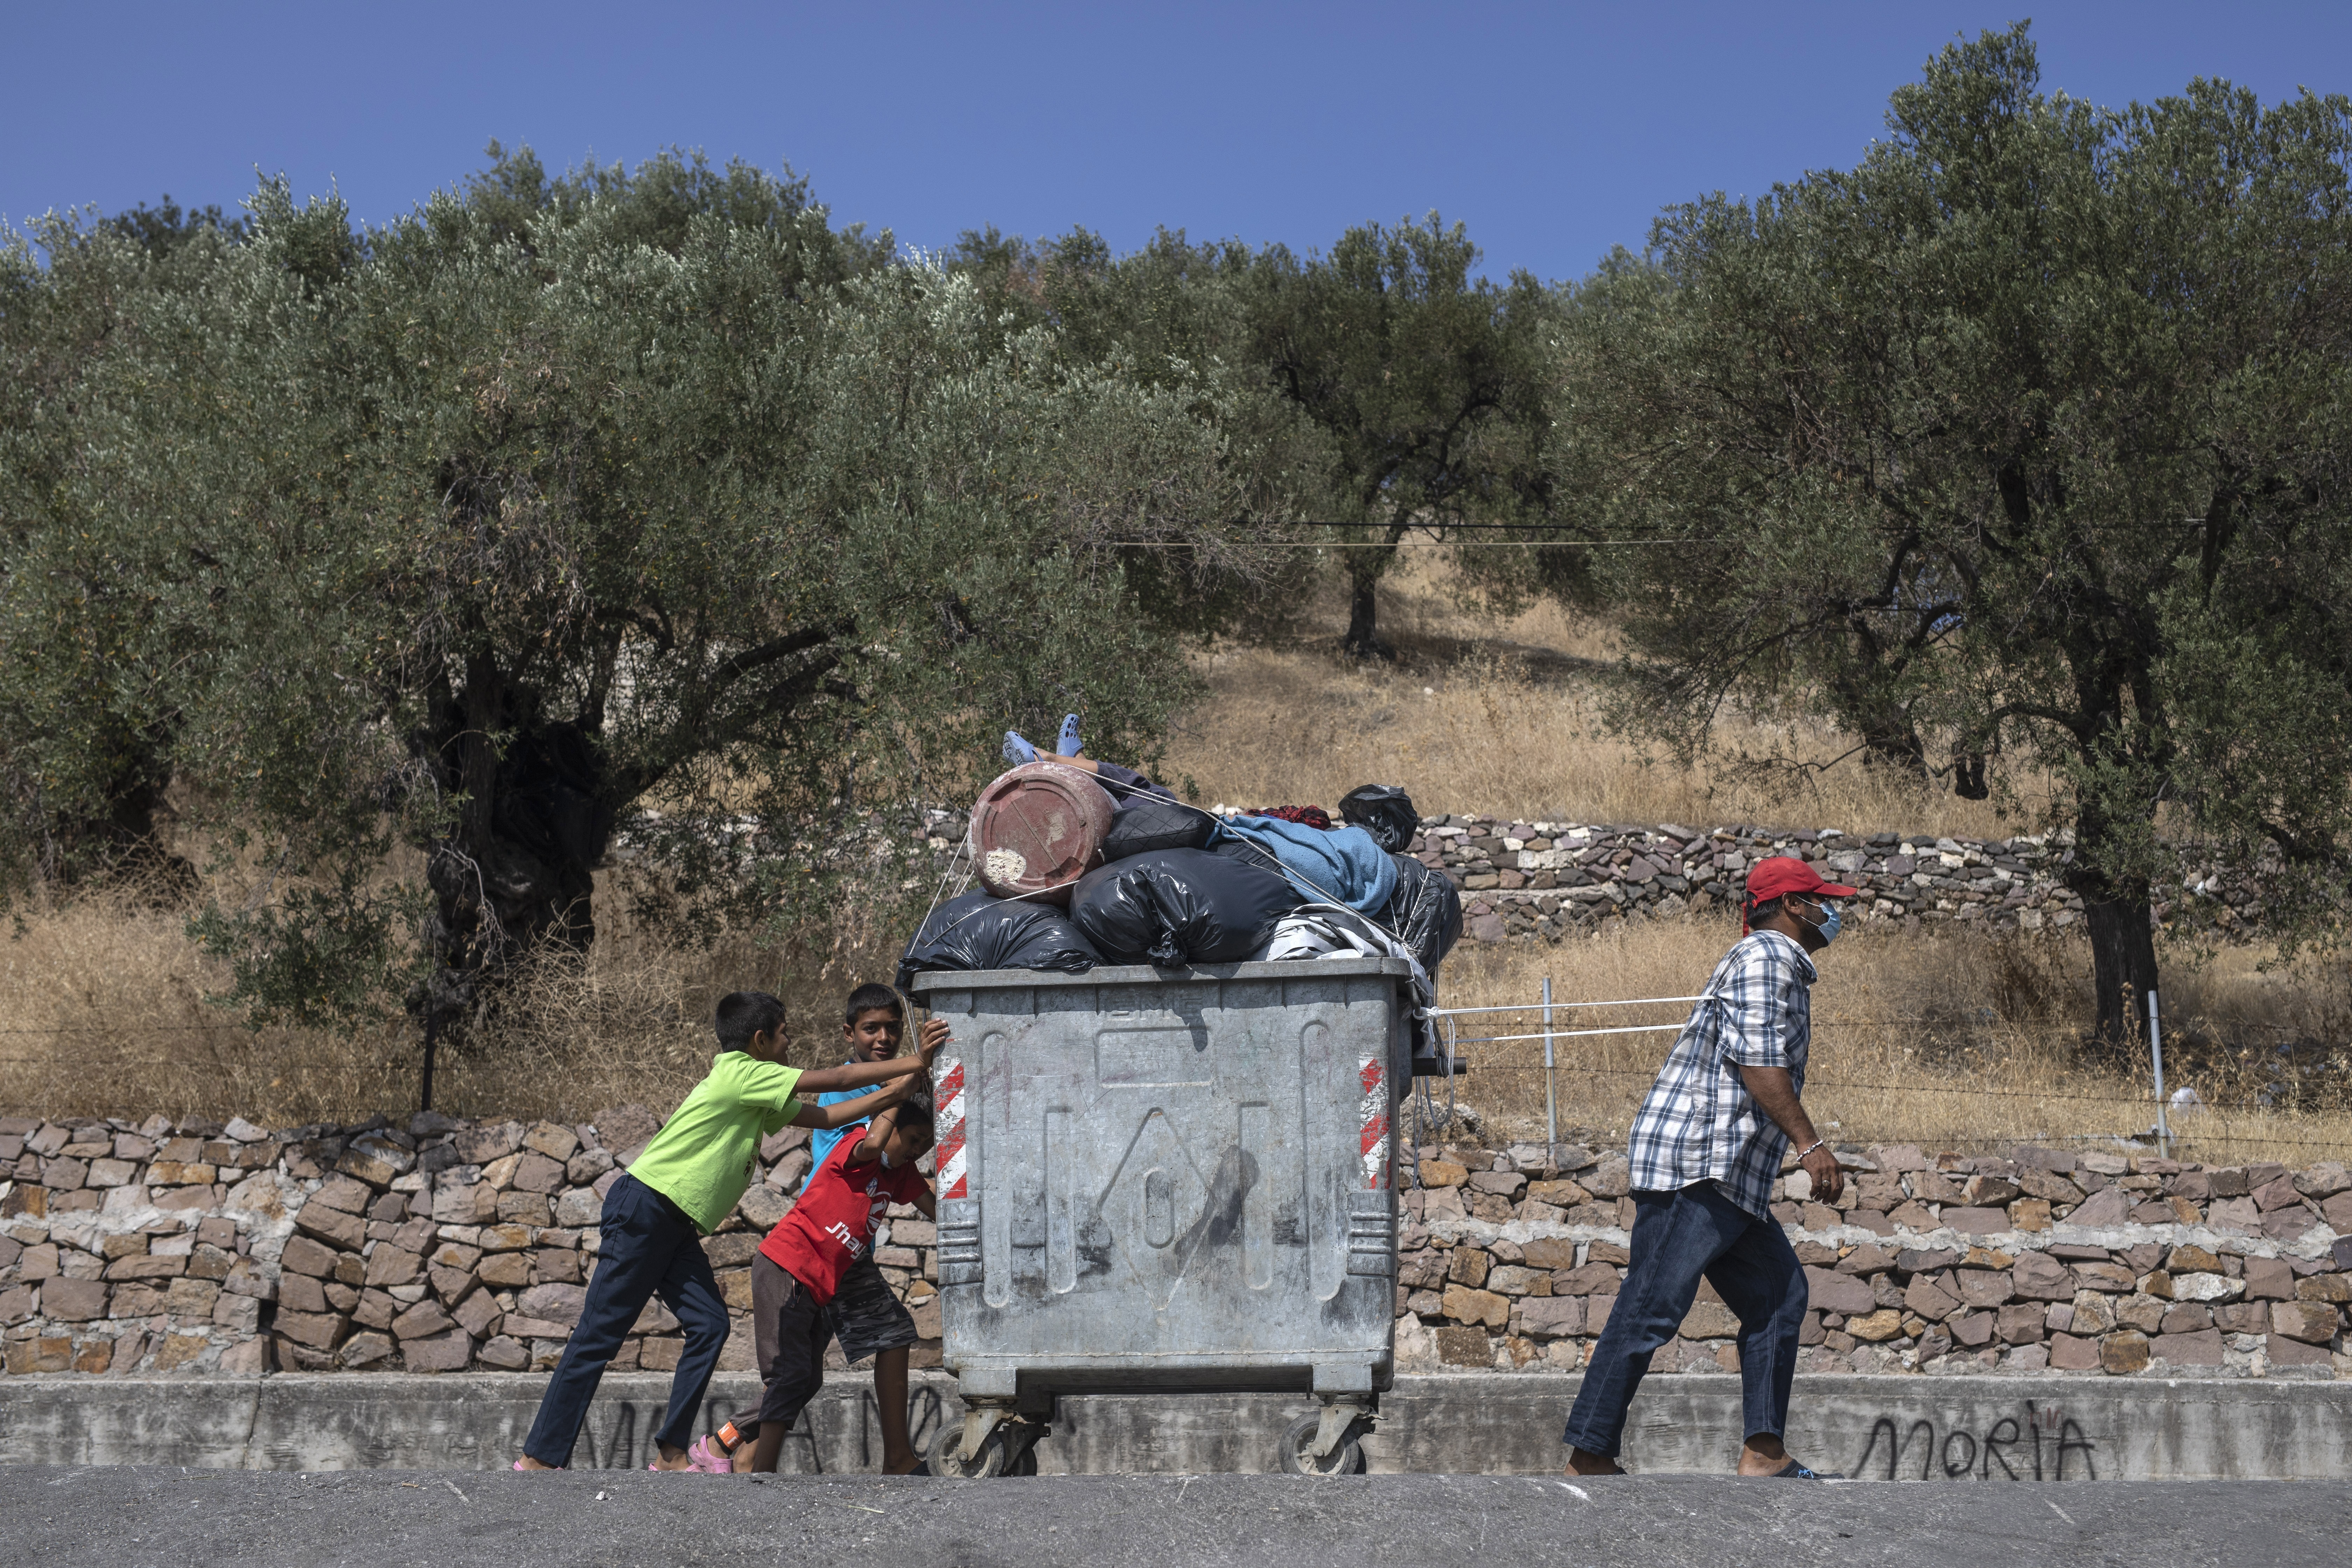 Migrants use a trash bin to move their belongings from the burned Moria refugee camp to a new army-built facility in Kara Tepe on the northeastern island of Lesbos, Greece, Friday, Sept. 18, 2020. Police on the Greek island of Lesbos on Friday resumed relocating migrants rendered homeless when fires ravaged the country's largest refugee camp amid a local COVID-19 outbreak. (Foto AP Photo/Petros Giannakouris)